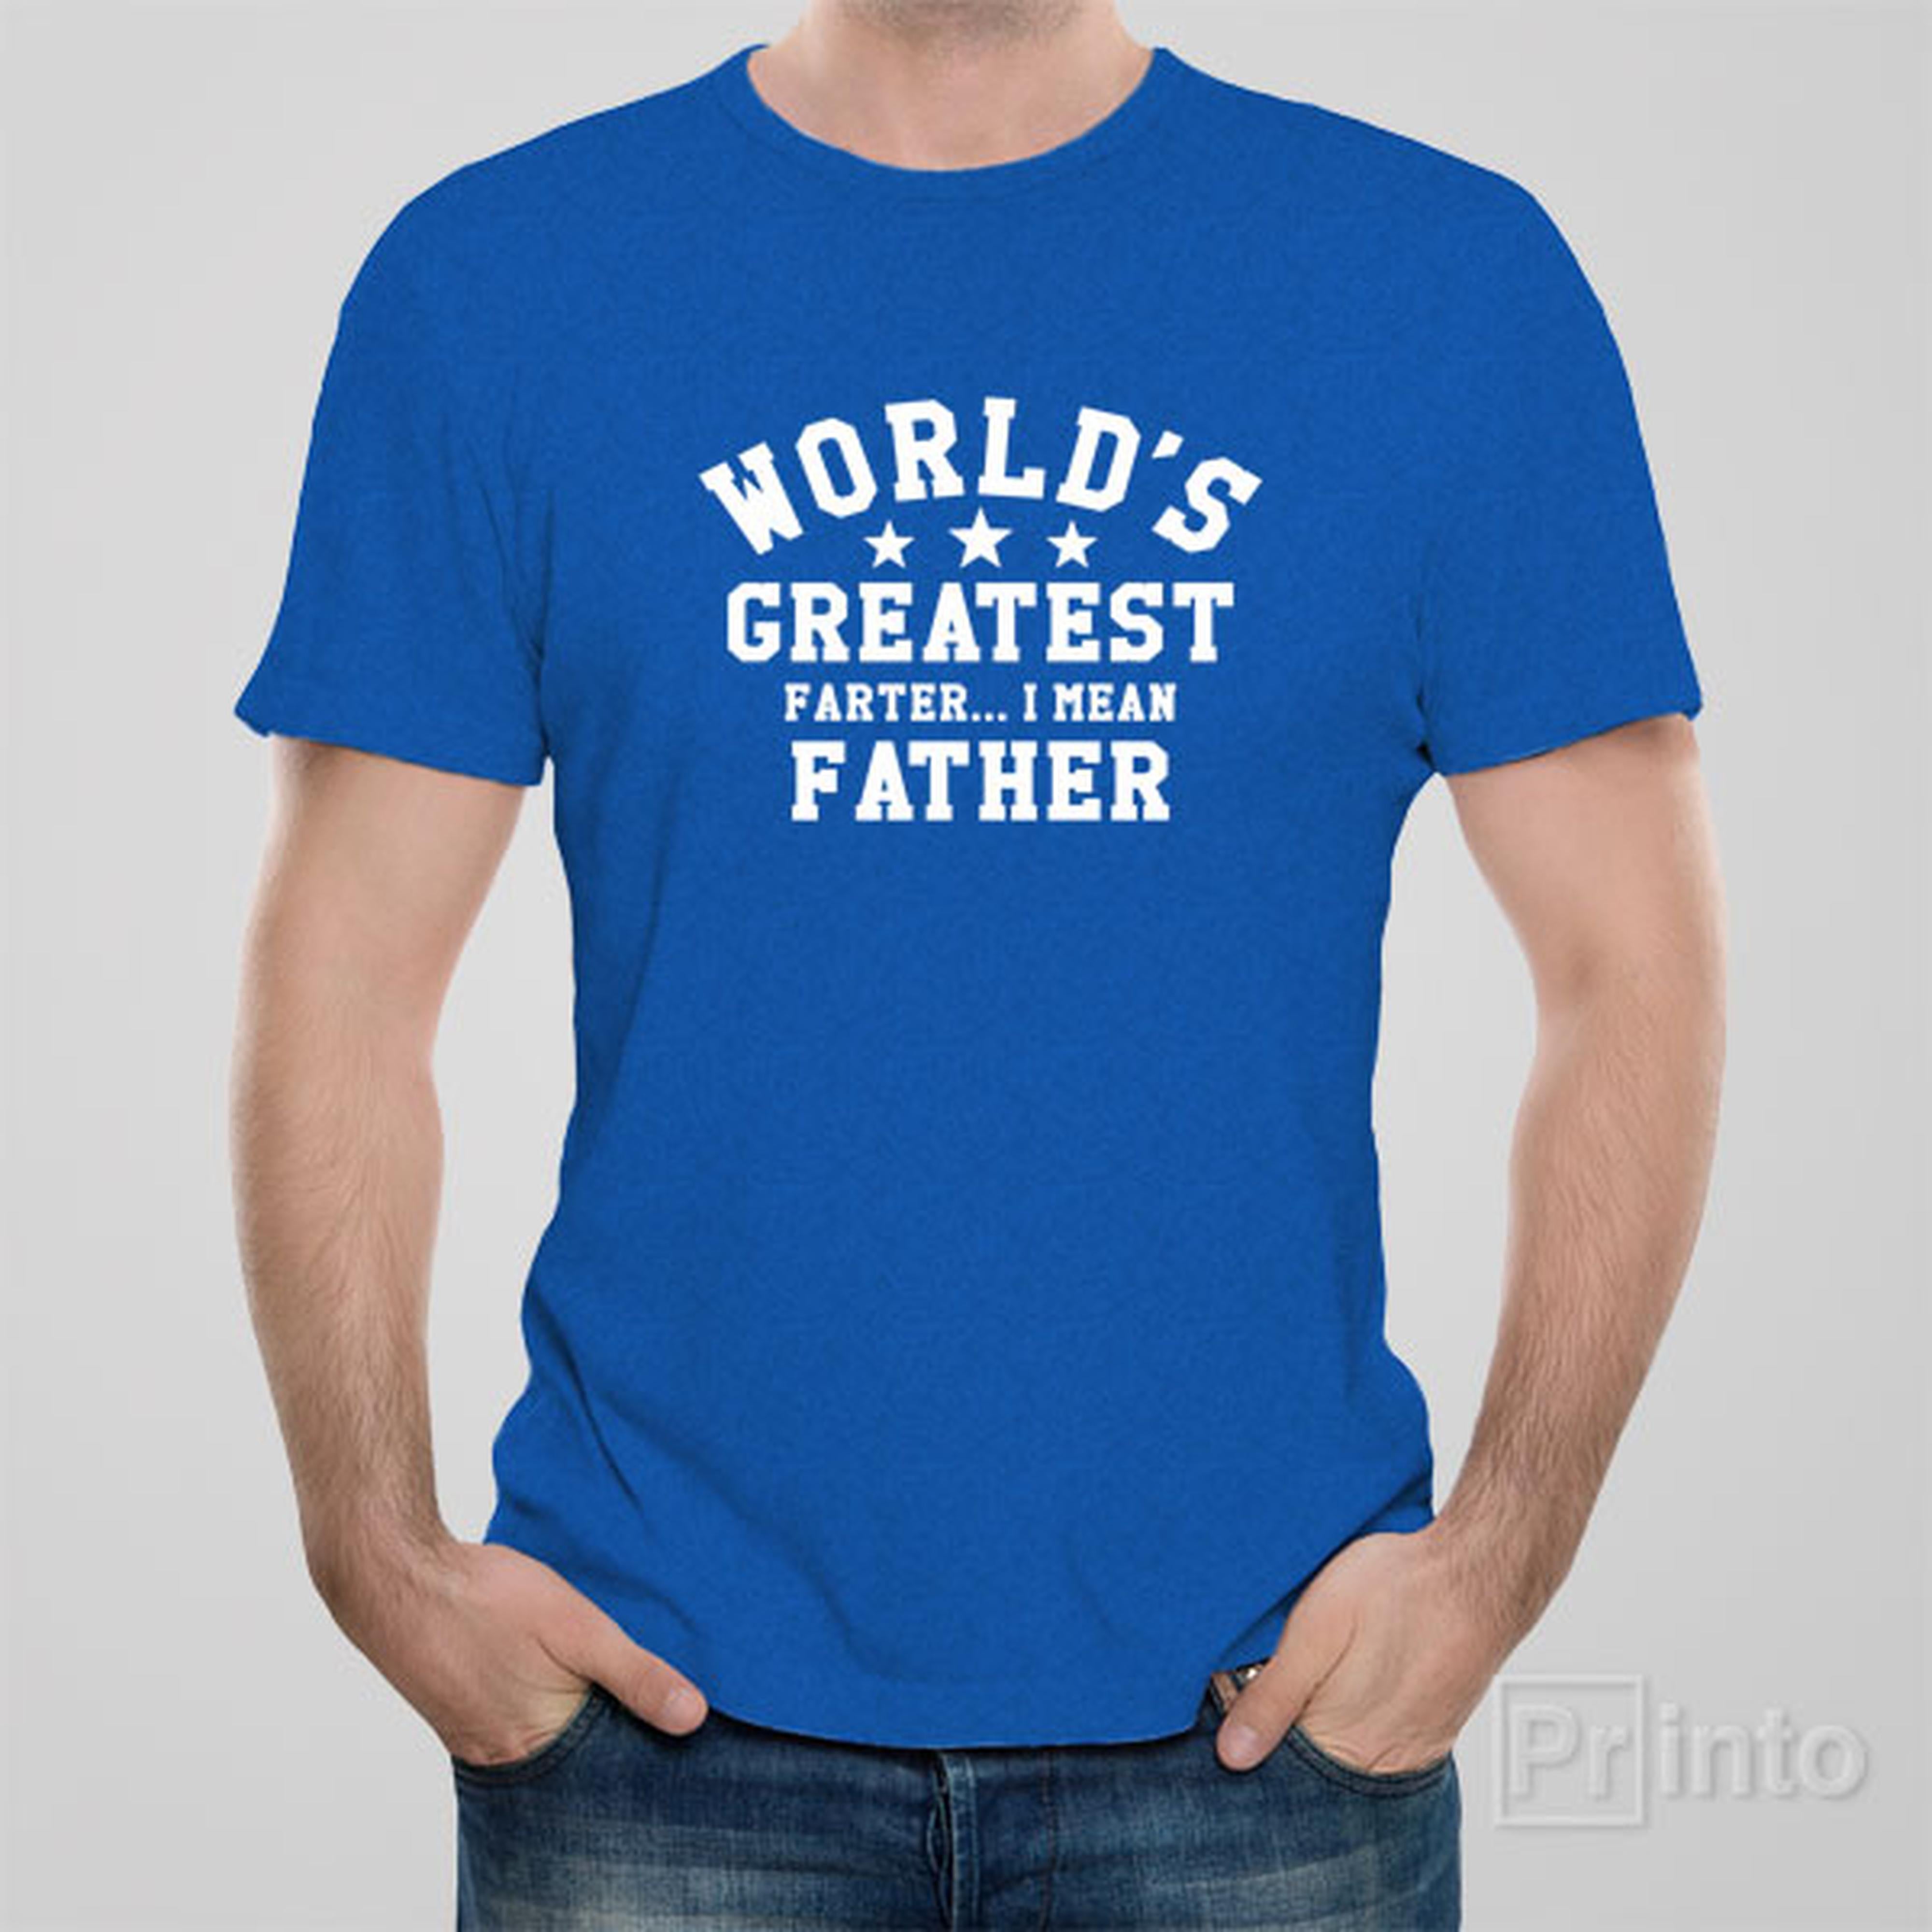 worlds-greatest-farter-i-mean-father-t-shirt